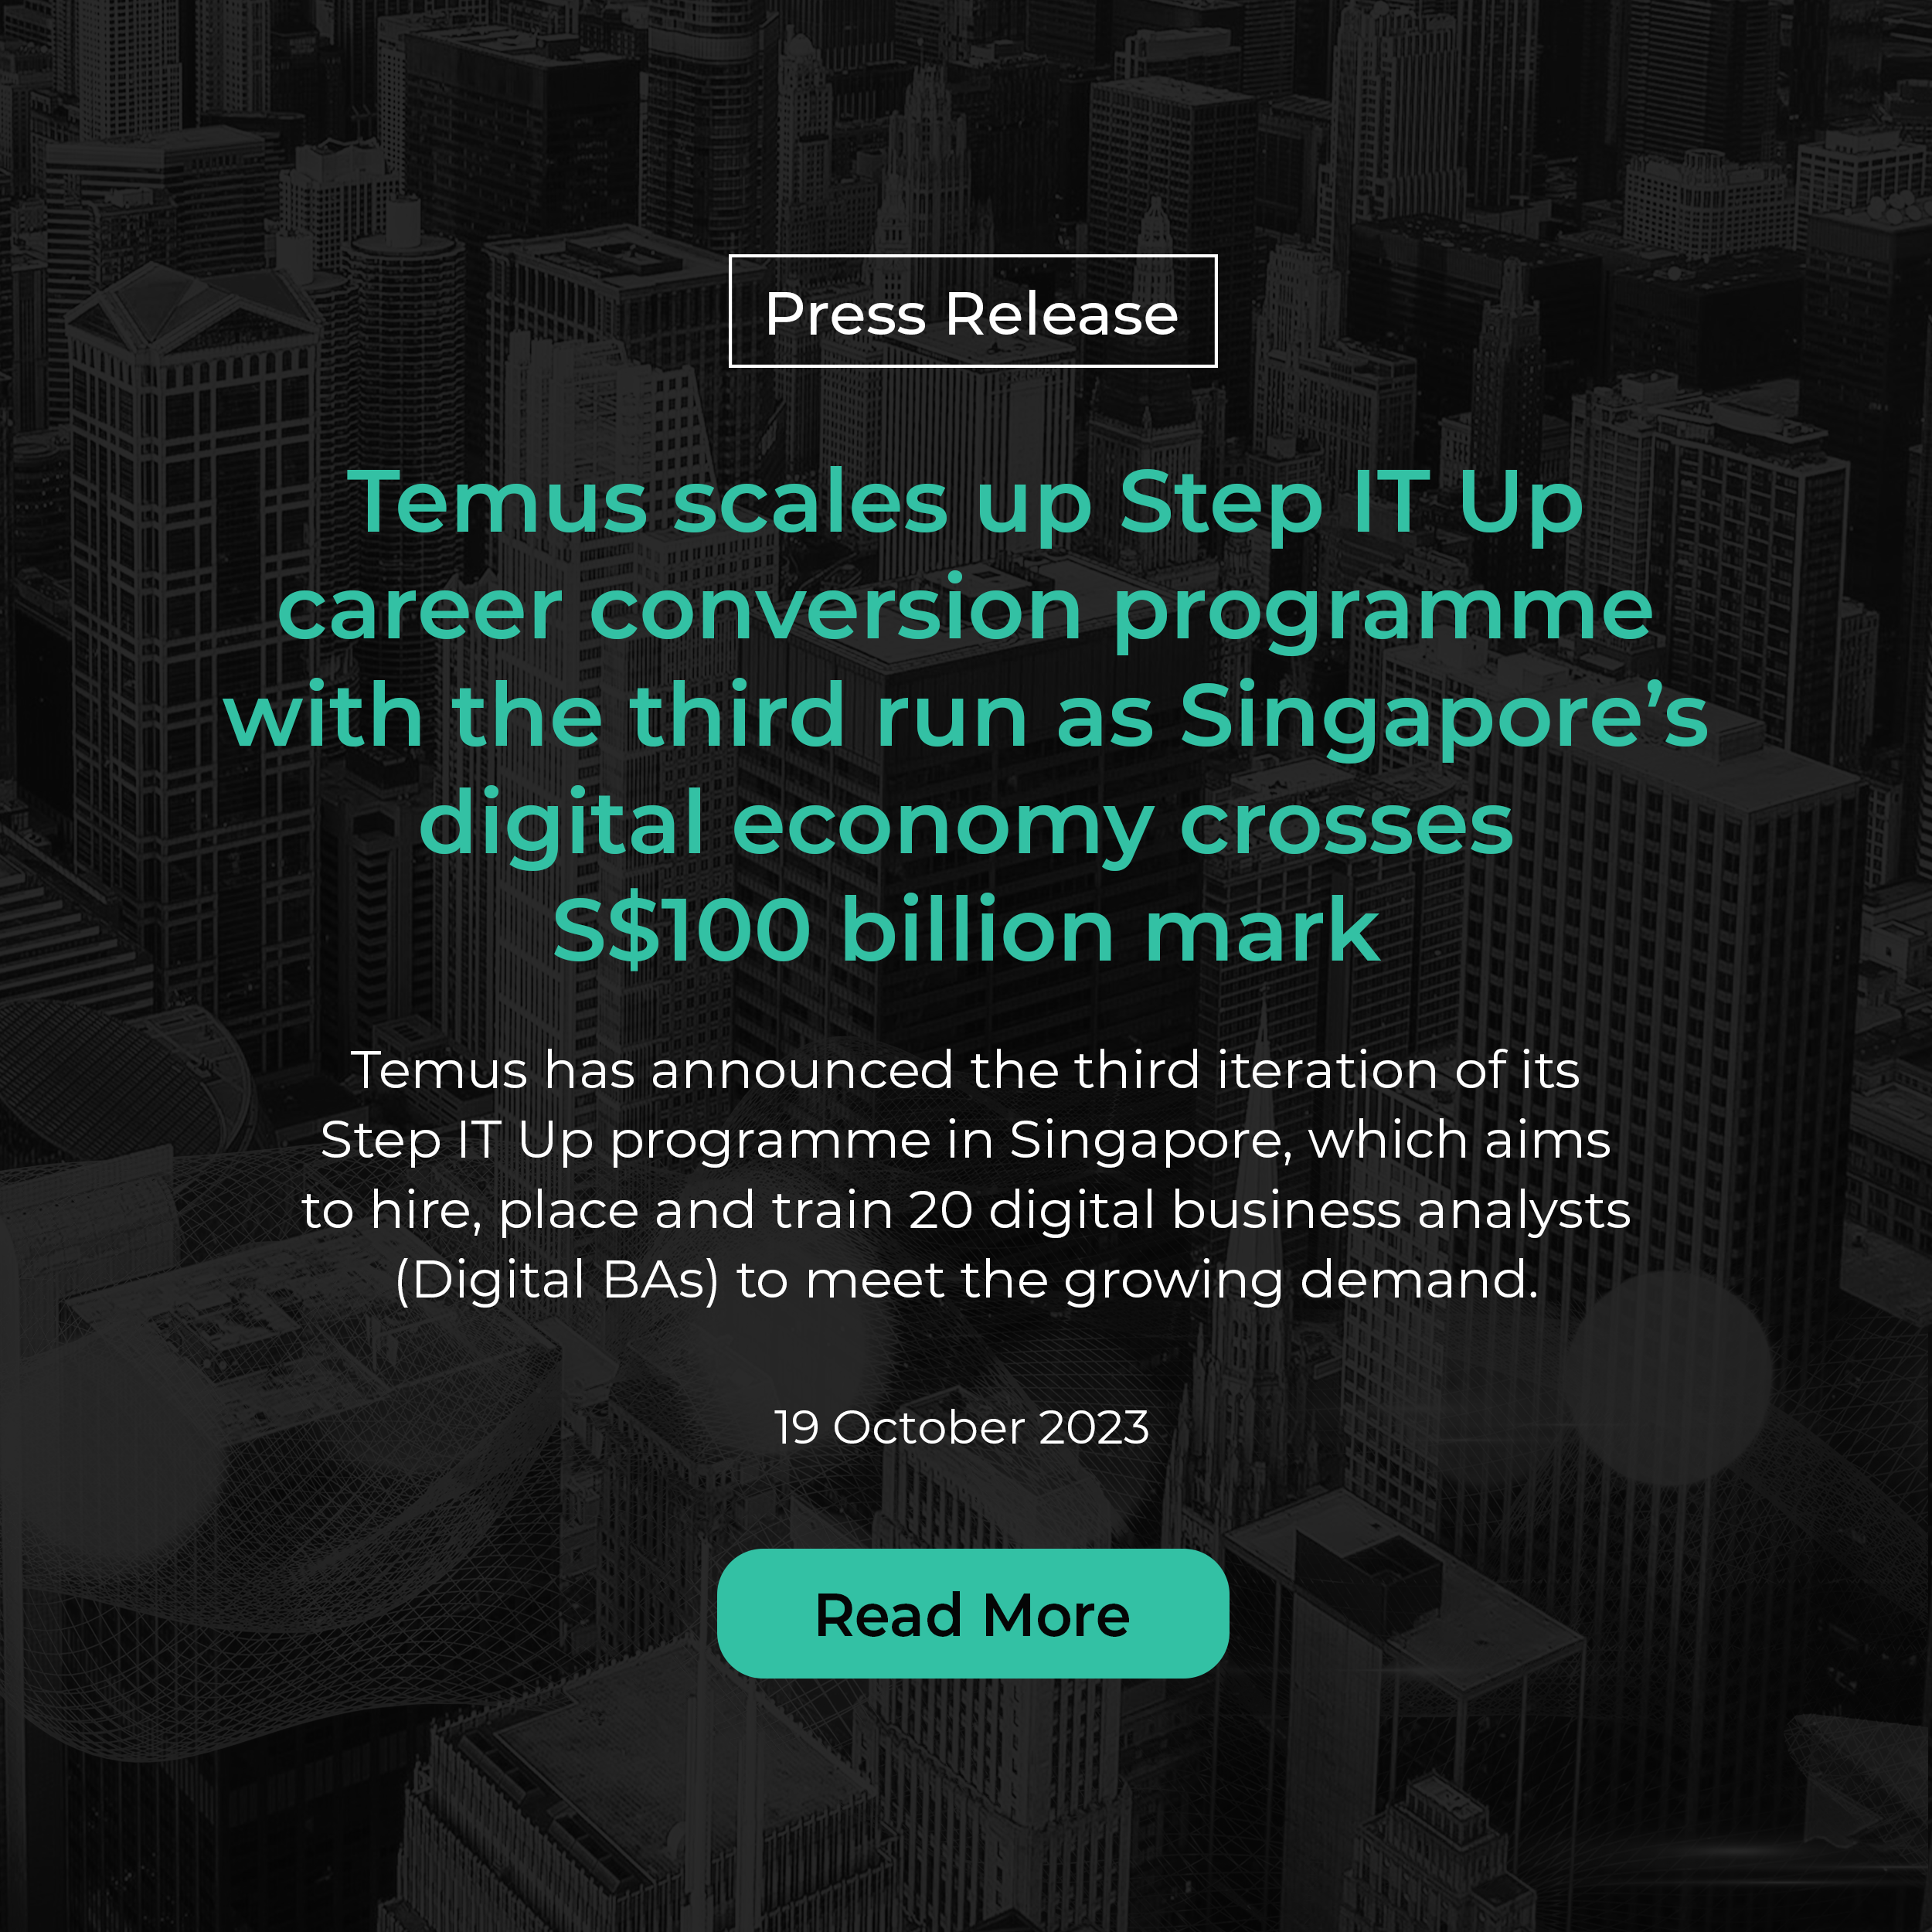 Press Release: Temus scales up Step IT Up career conversion programme with third run as Singapore’s digital economy crosses S$100 billion mark 